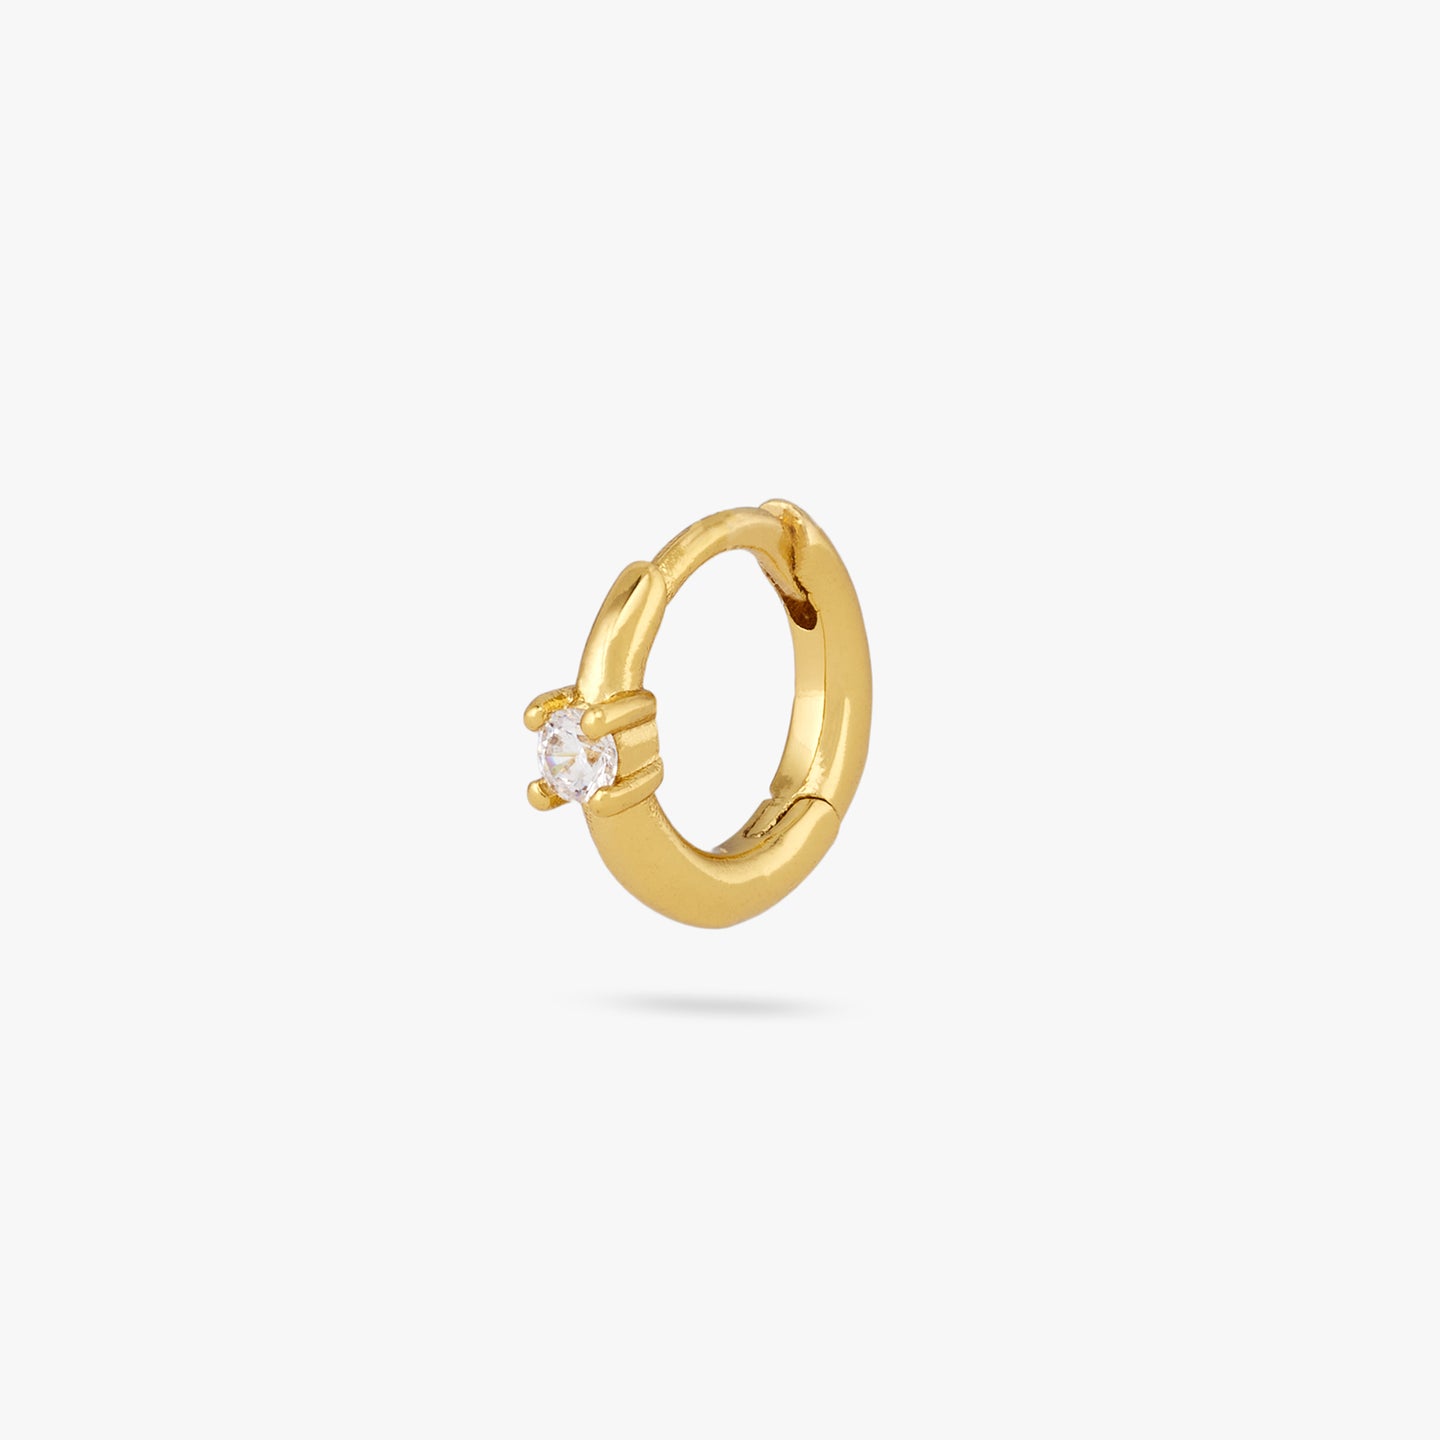 This is a small gold huggie with a clear cz detail in the center of the front color:null|gold/clear